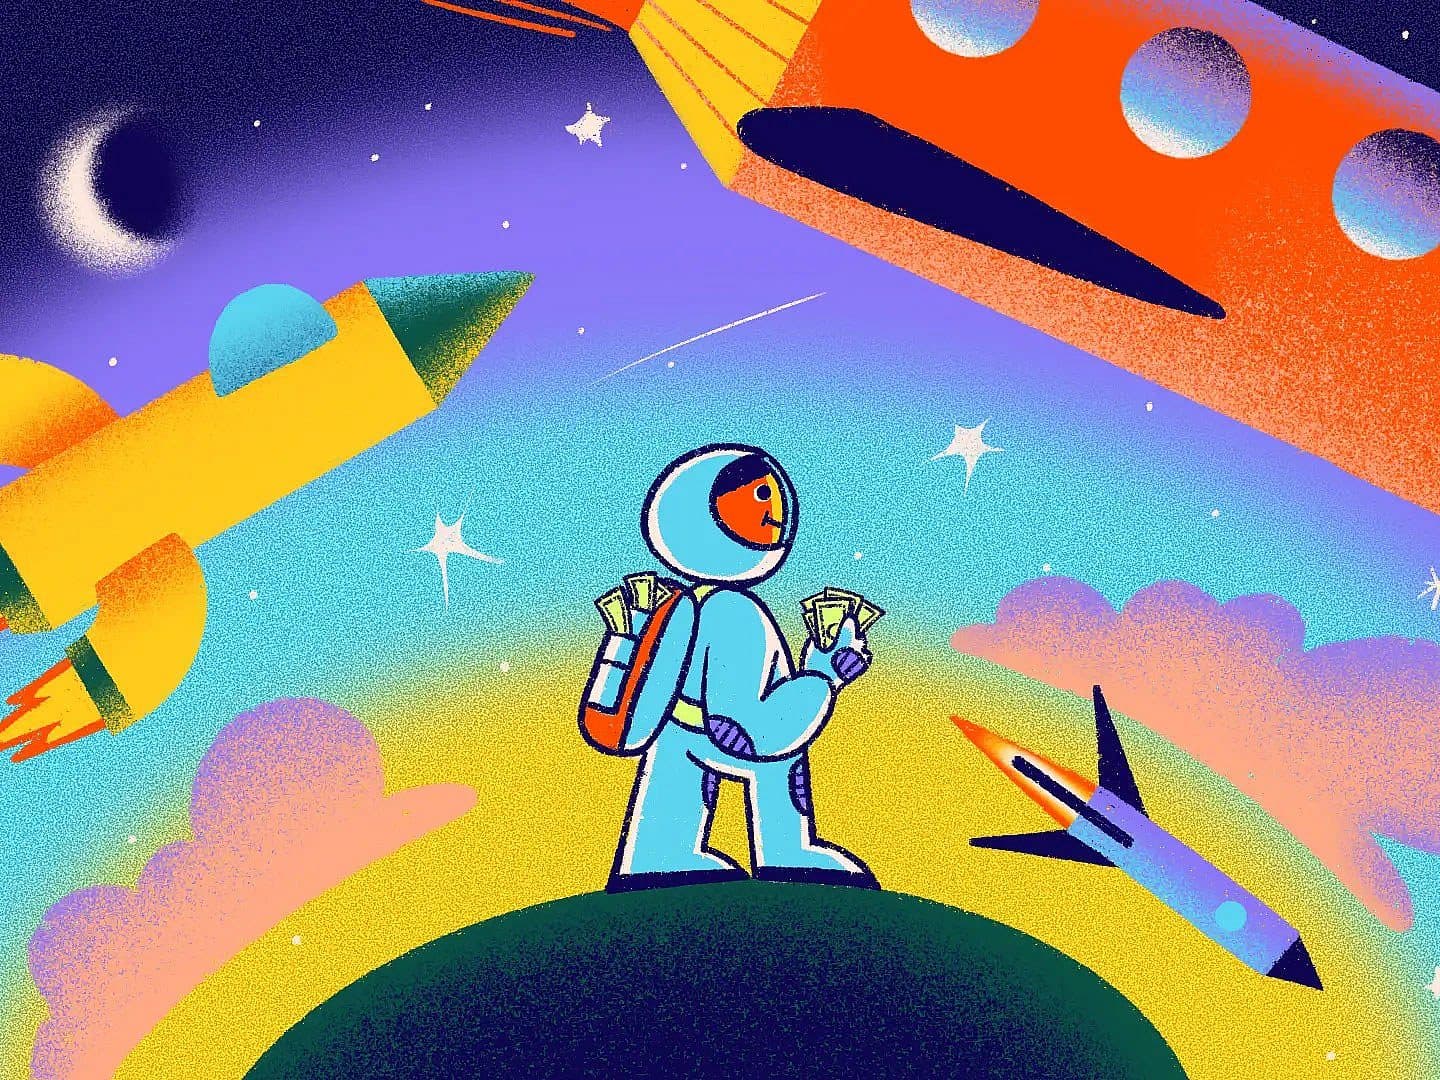 A cartoon astronaut stands on a small hill, holding money, under a colorful starry sky. Three spaceships fly around: a yellow one on the left, an orange one on the top right, and a blue one on the bottom right. The scene is whimsical and vibrant.